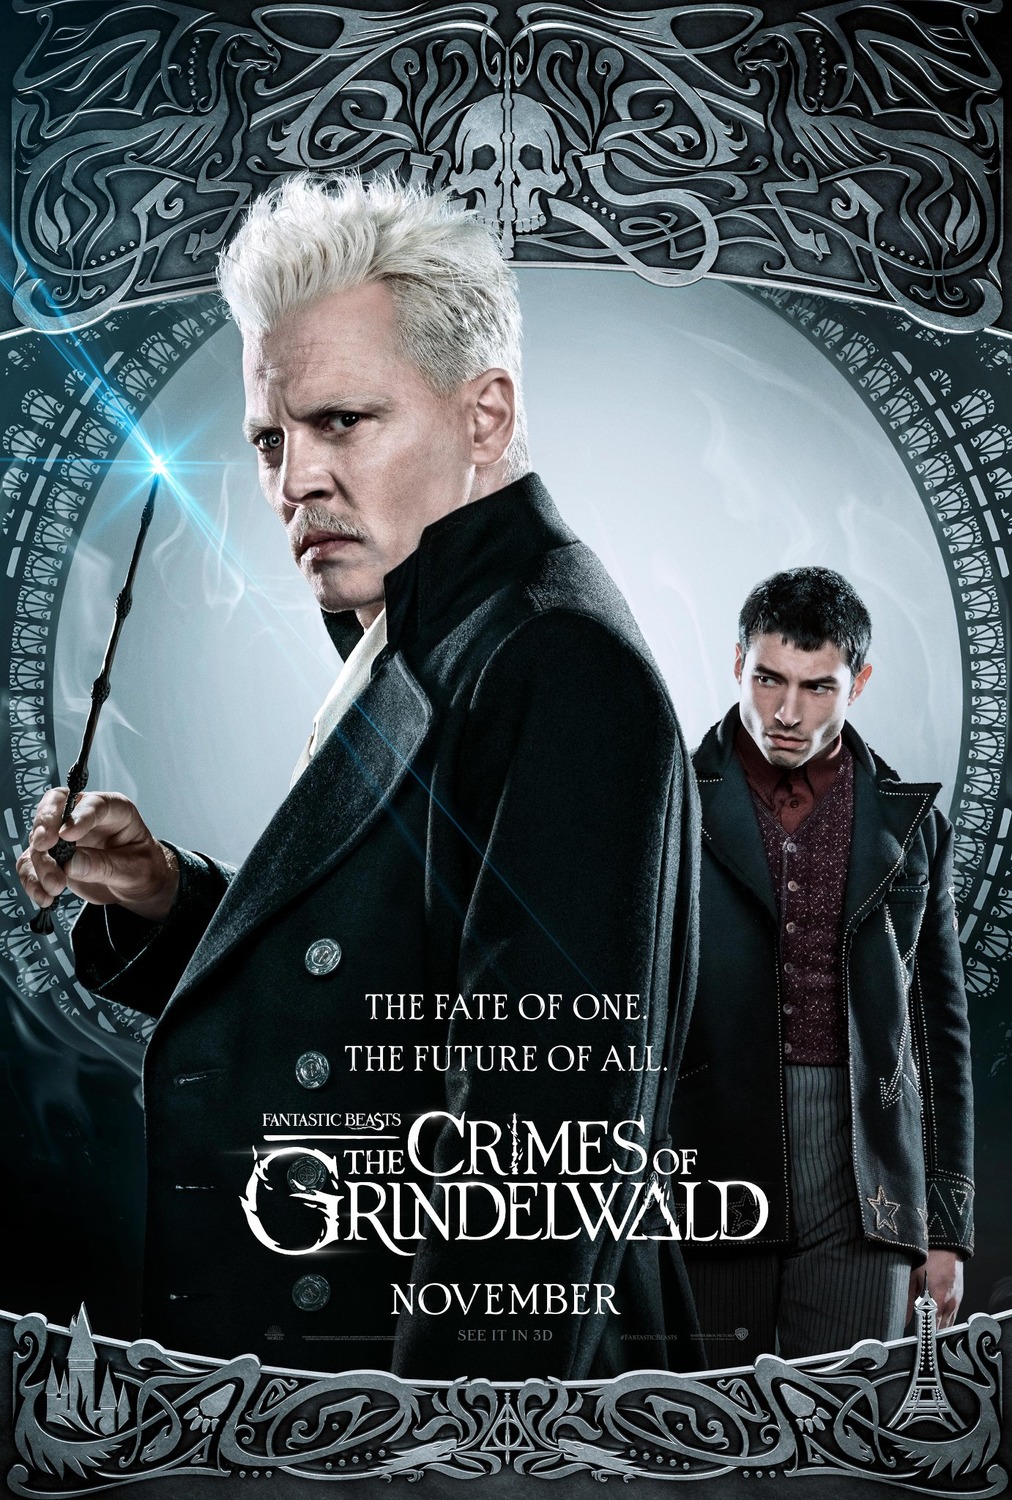 Extra Large Movie Poster Image for Fantastic Beasts: The Crimes of Grindelwald (#18 of 32)